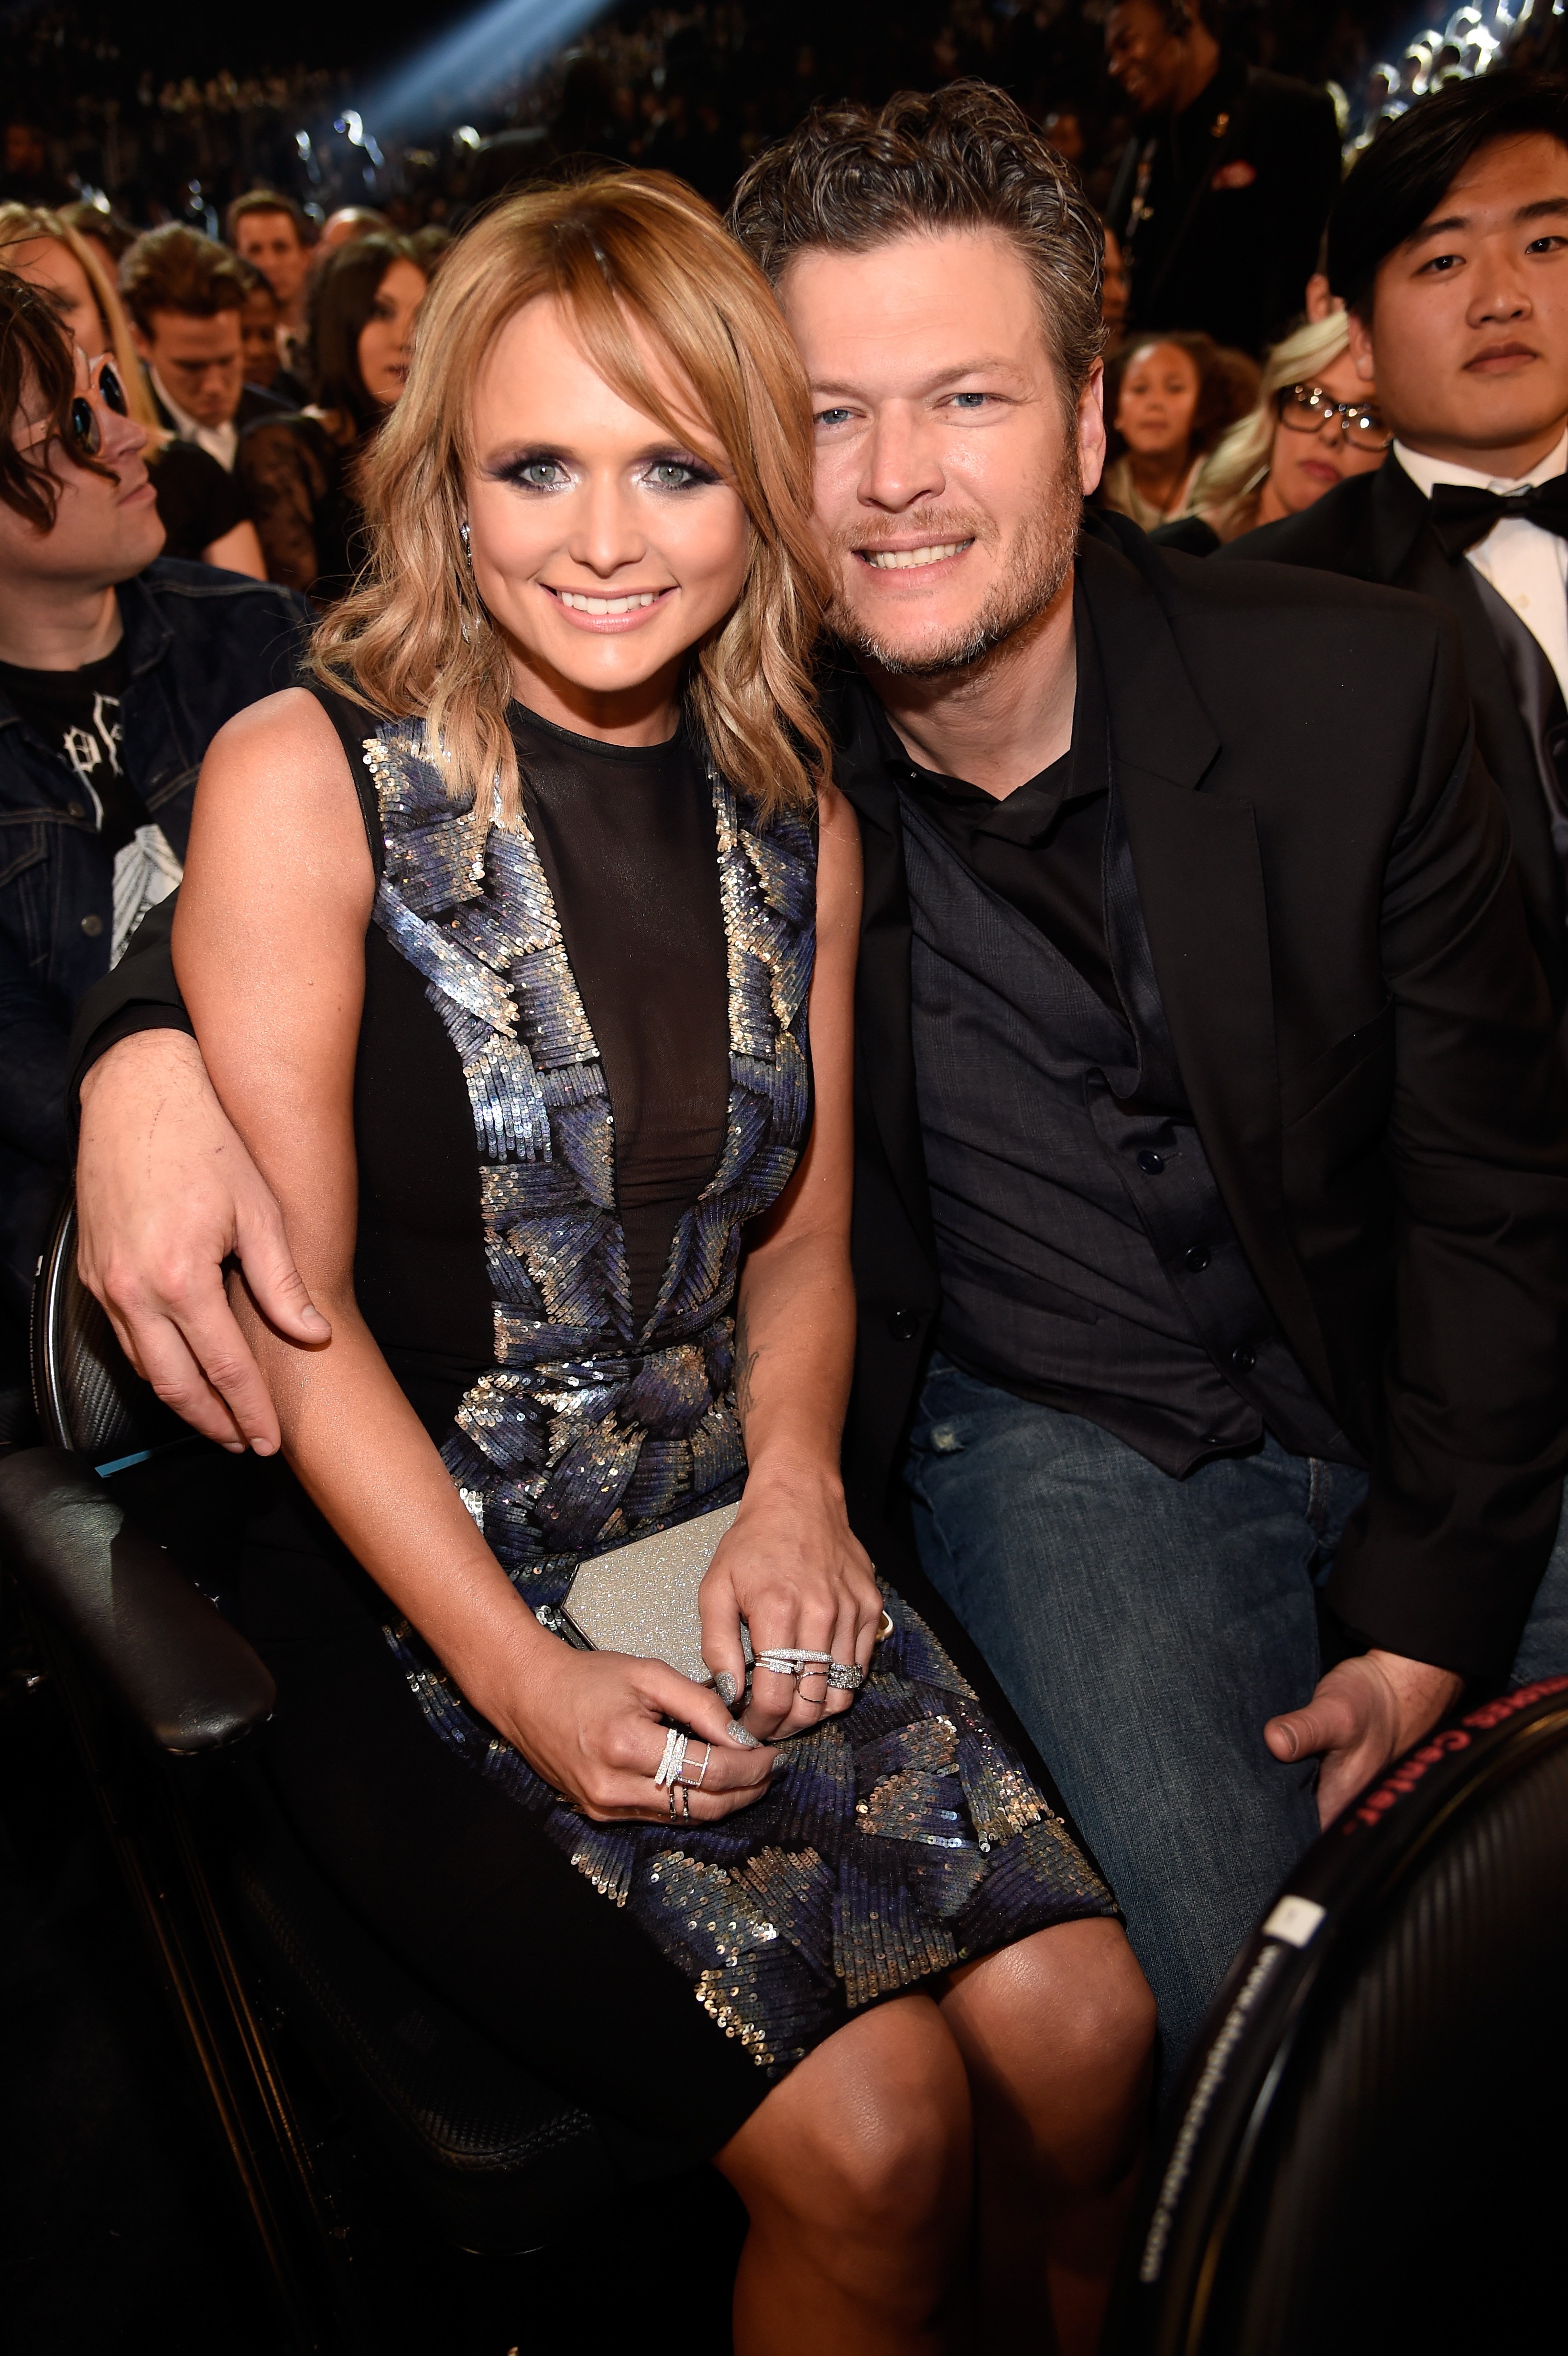 Singers Miranda Lambert and Blake Shelton during the 57th Annual Grammy Awards at Staples Center on February 8, 2015 in Los Angeles, California. / Source: Getty Images